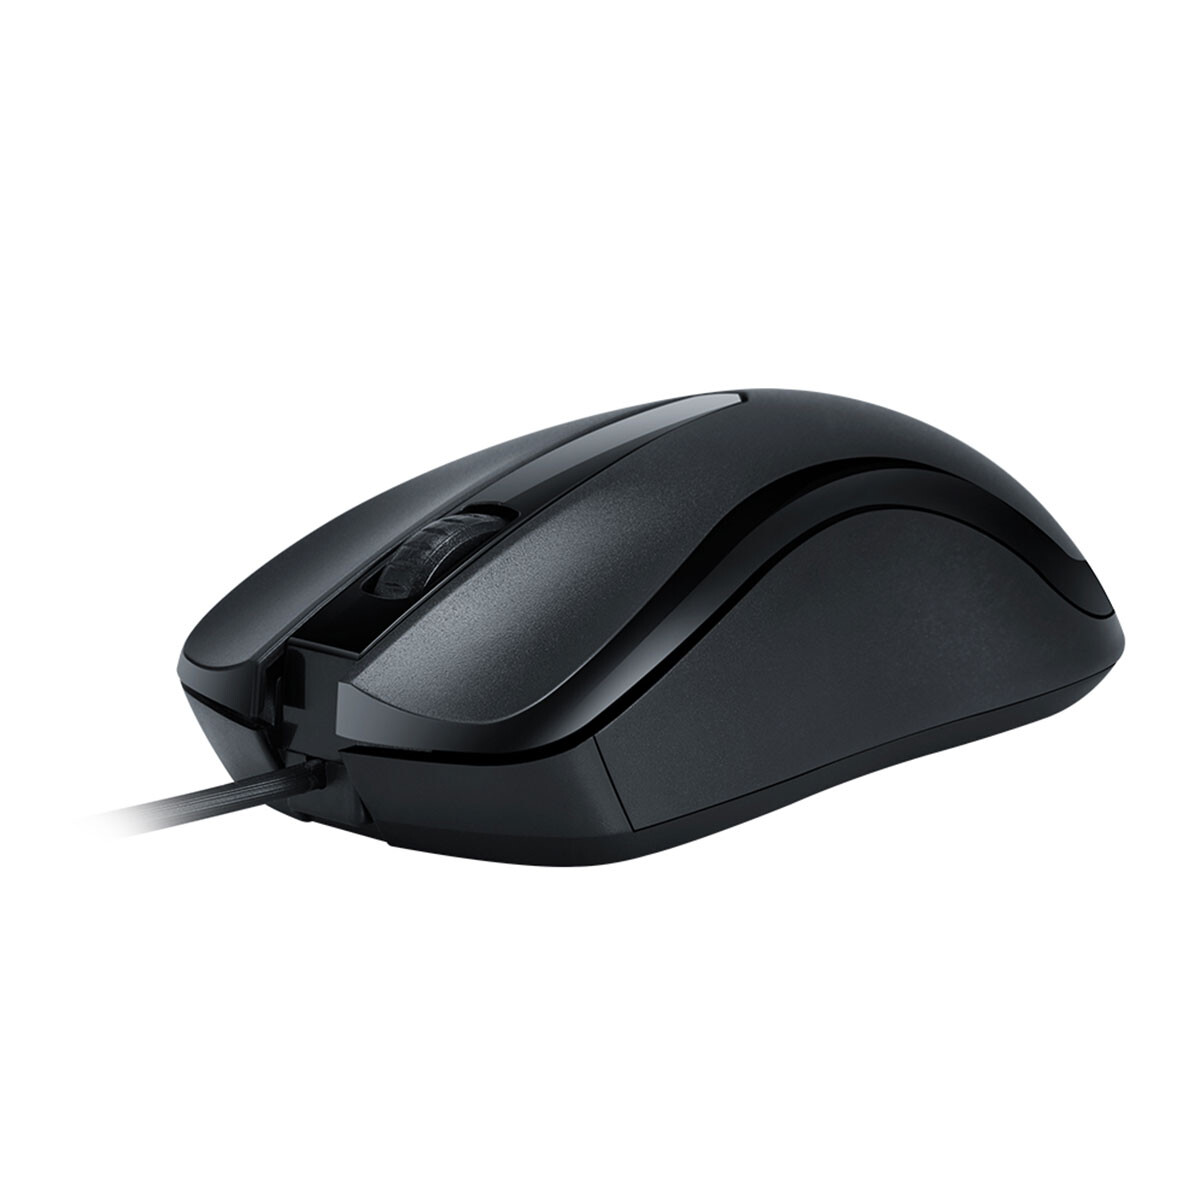 MOUSE CON CABLE TWOLF - V12BK - NEGRO 